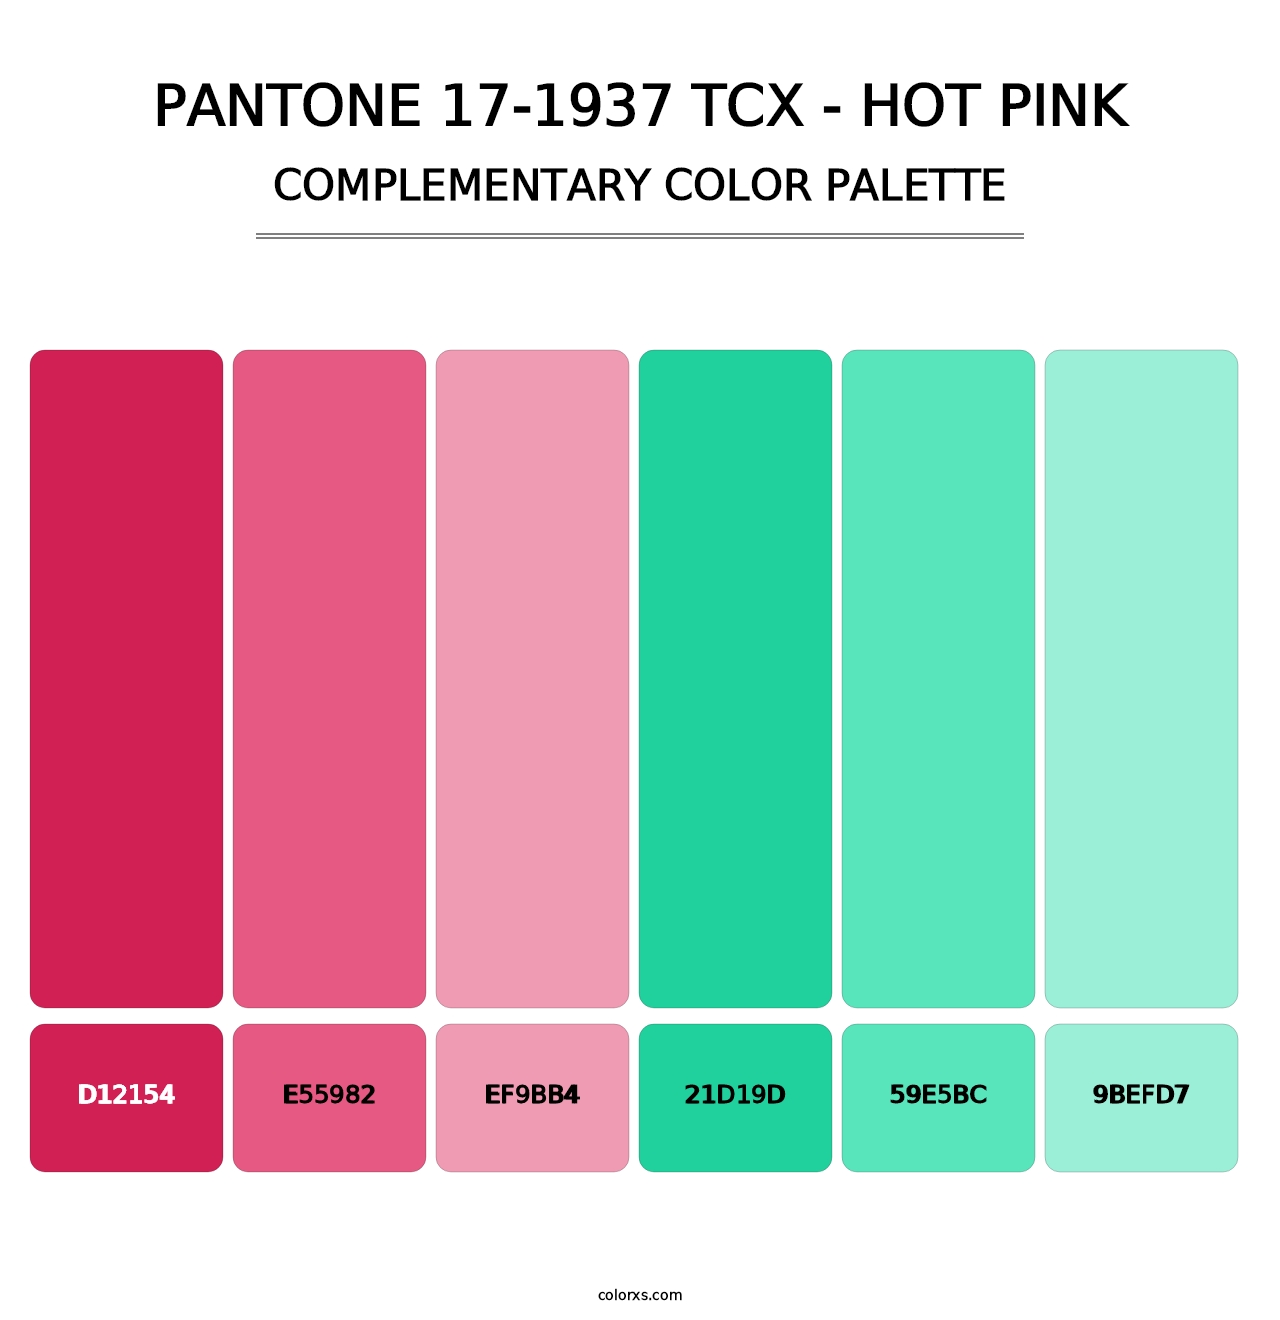 PANTONE 17-1937 TCX - Hot Pink - Complementary Color Palette